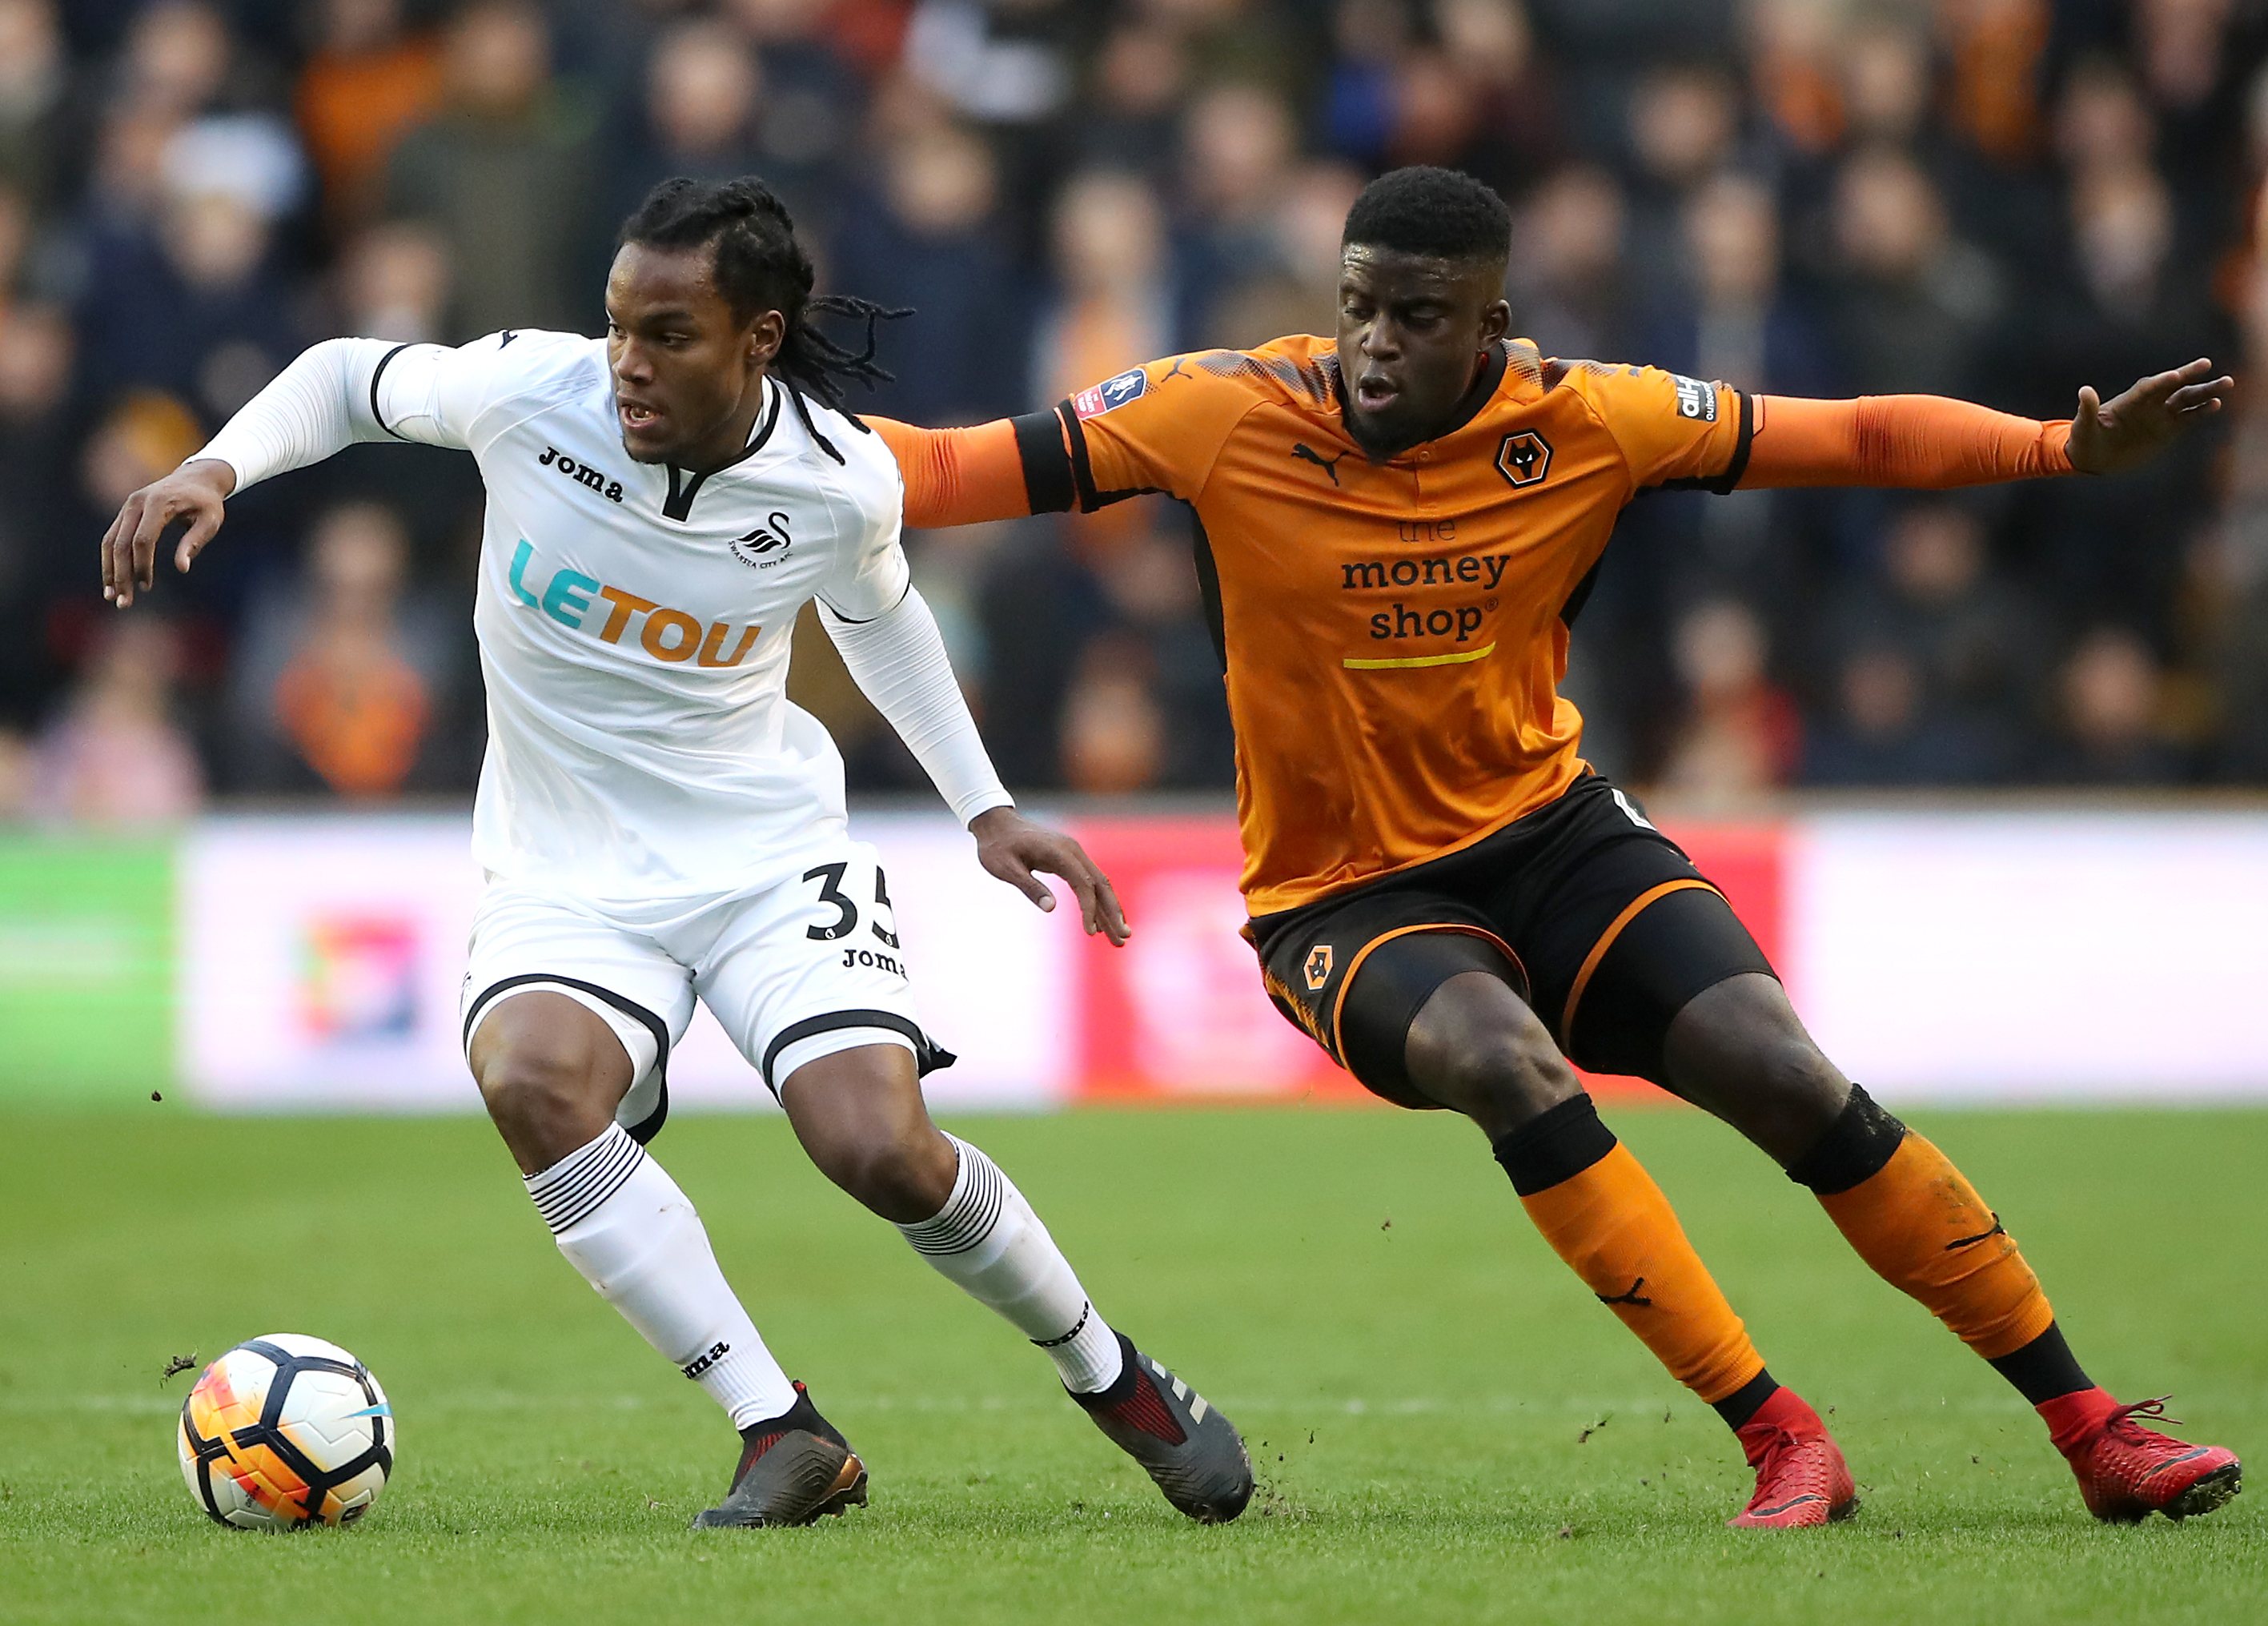 Wolverhampton Wanderers v Swansea City - FA Cup - Third Round - Molineux